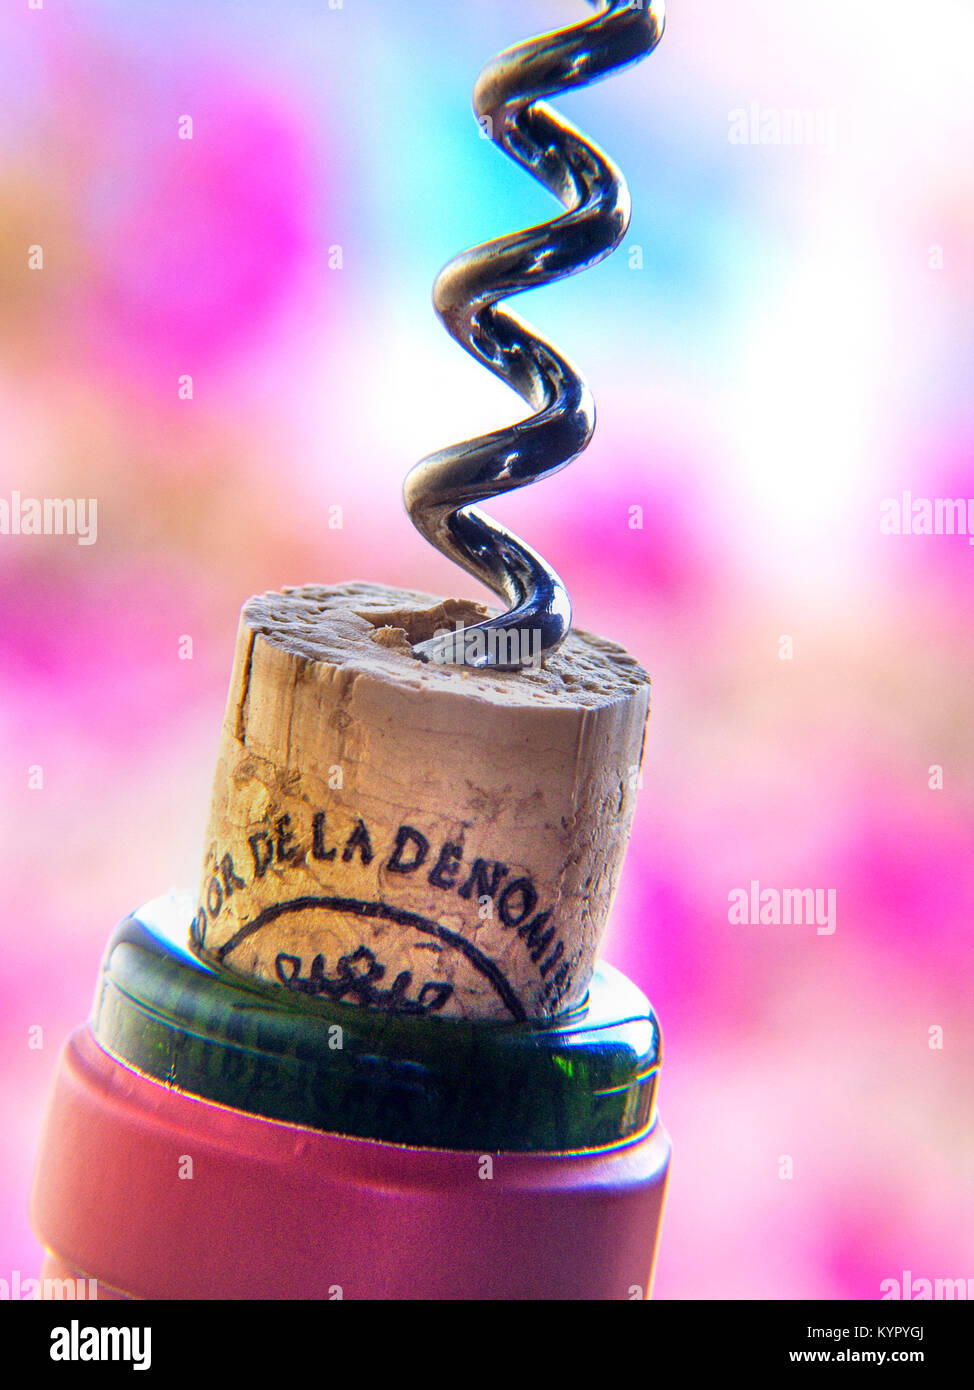 Spanish red wine bottle close up pulling cork with corkscrew in alfresco holiday vacation setting flowers garden pool Stock Photo